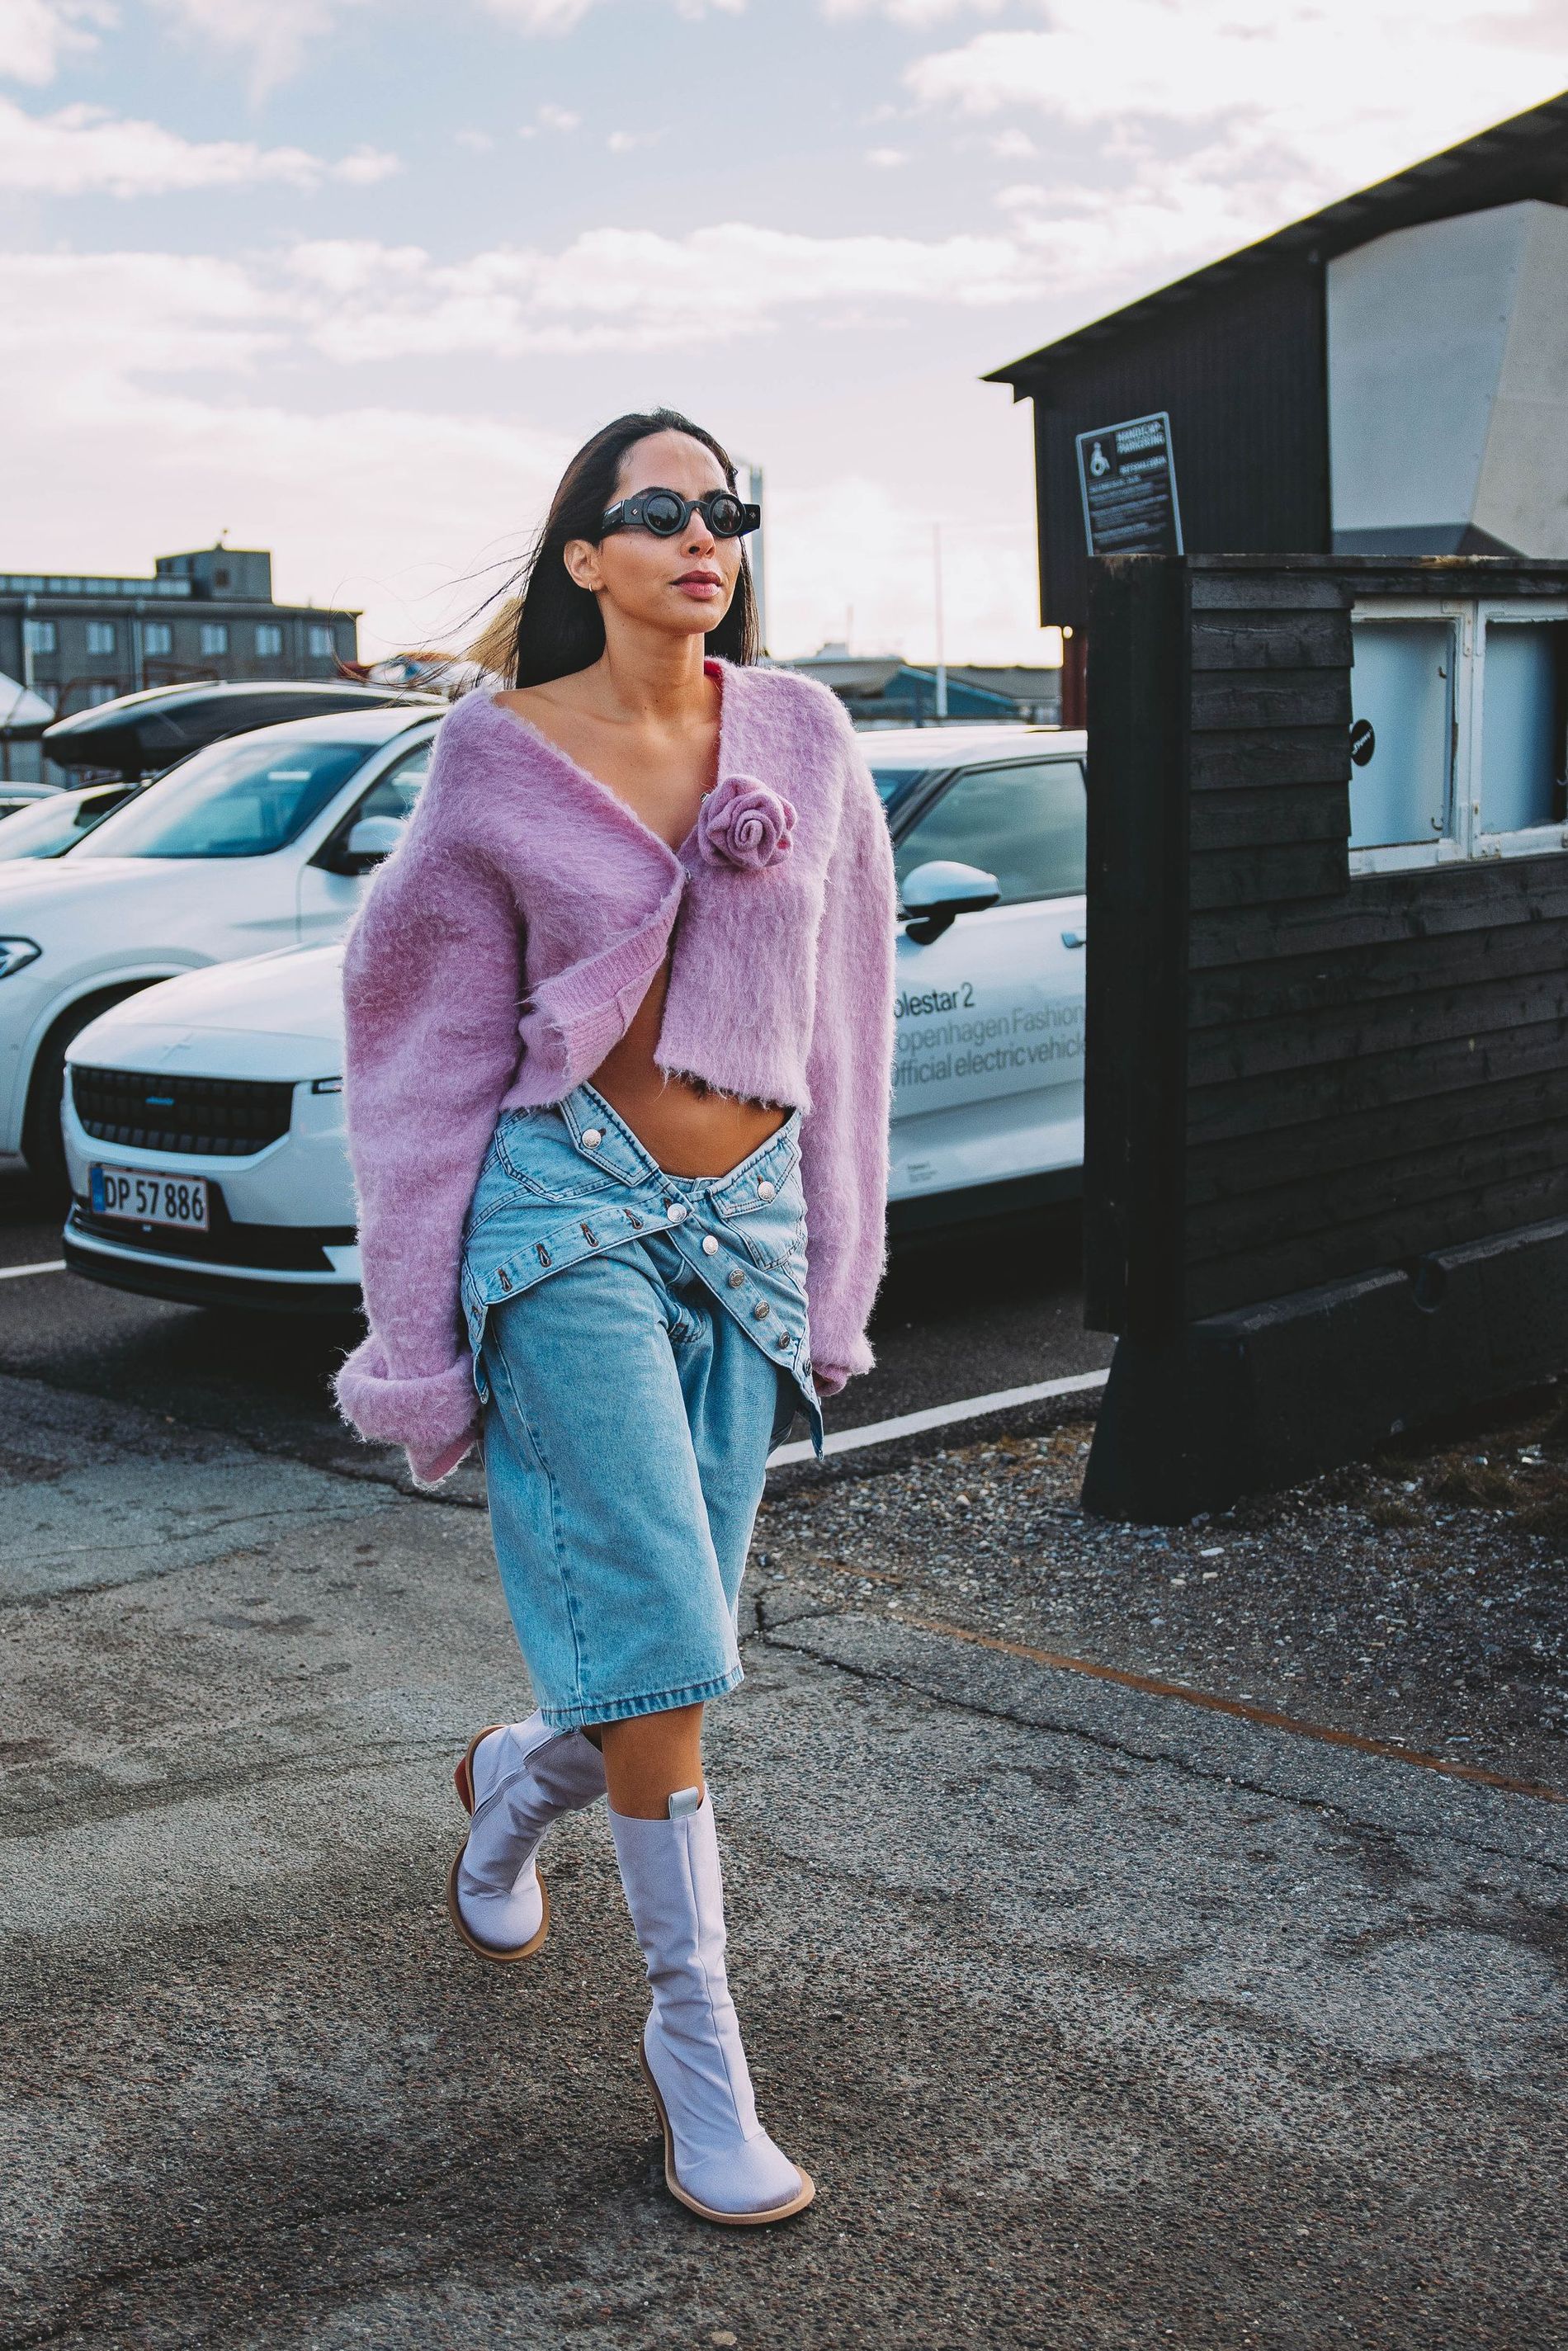 A guest at CPHFW poses for a street style photo wearing a lilac fuzzy cardigan with a fabric rose and a denim skirt